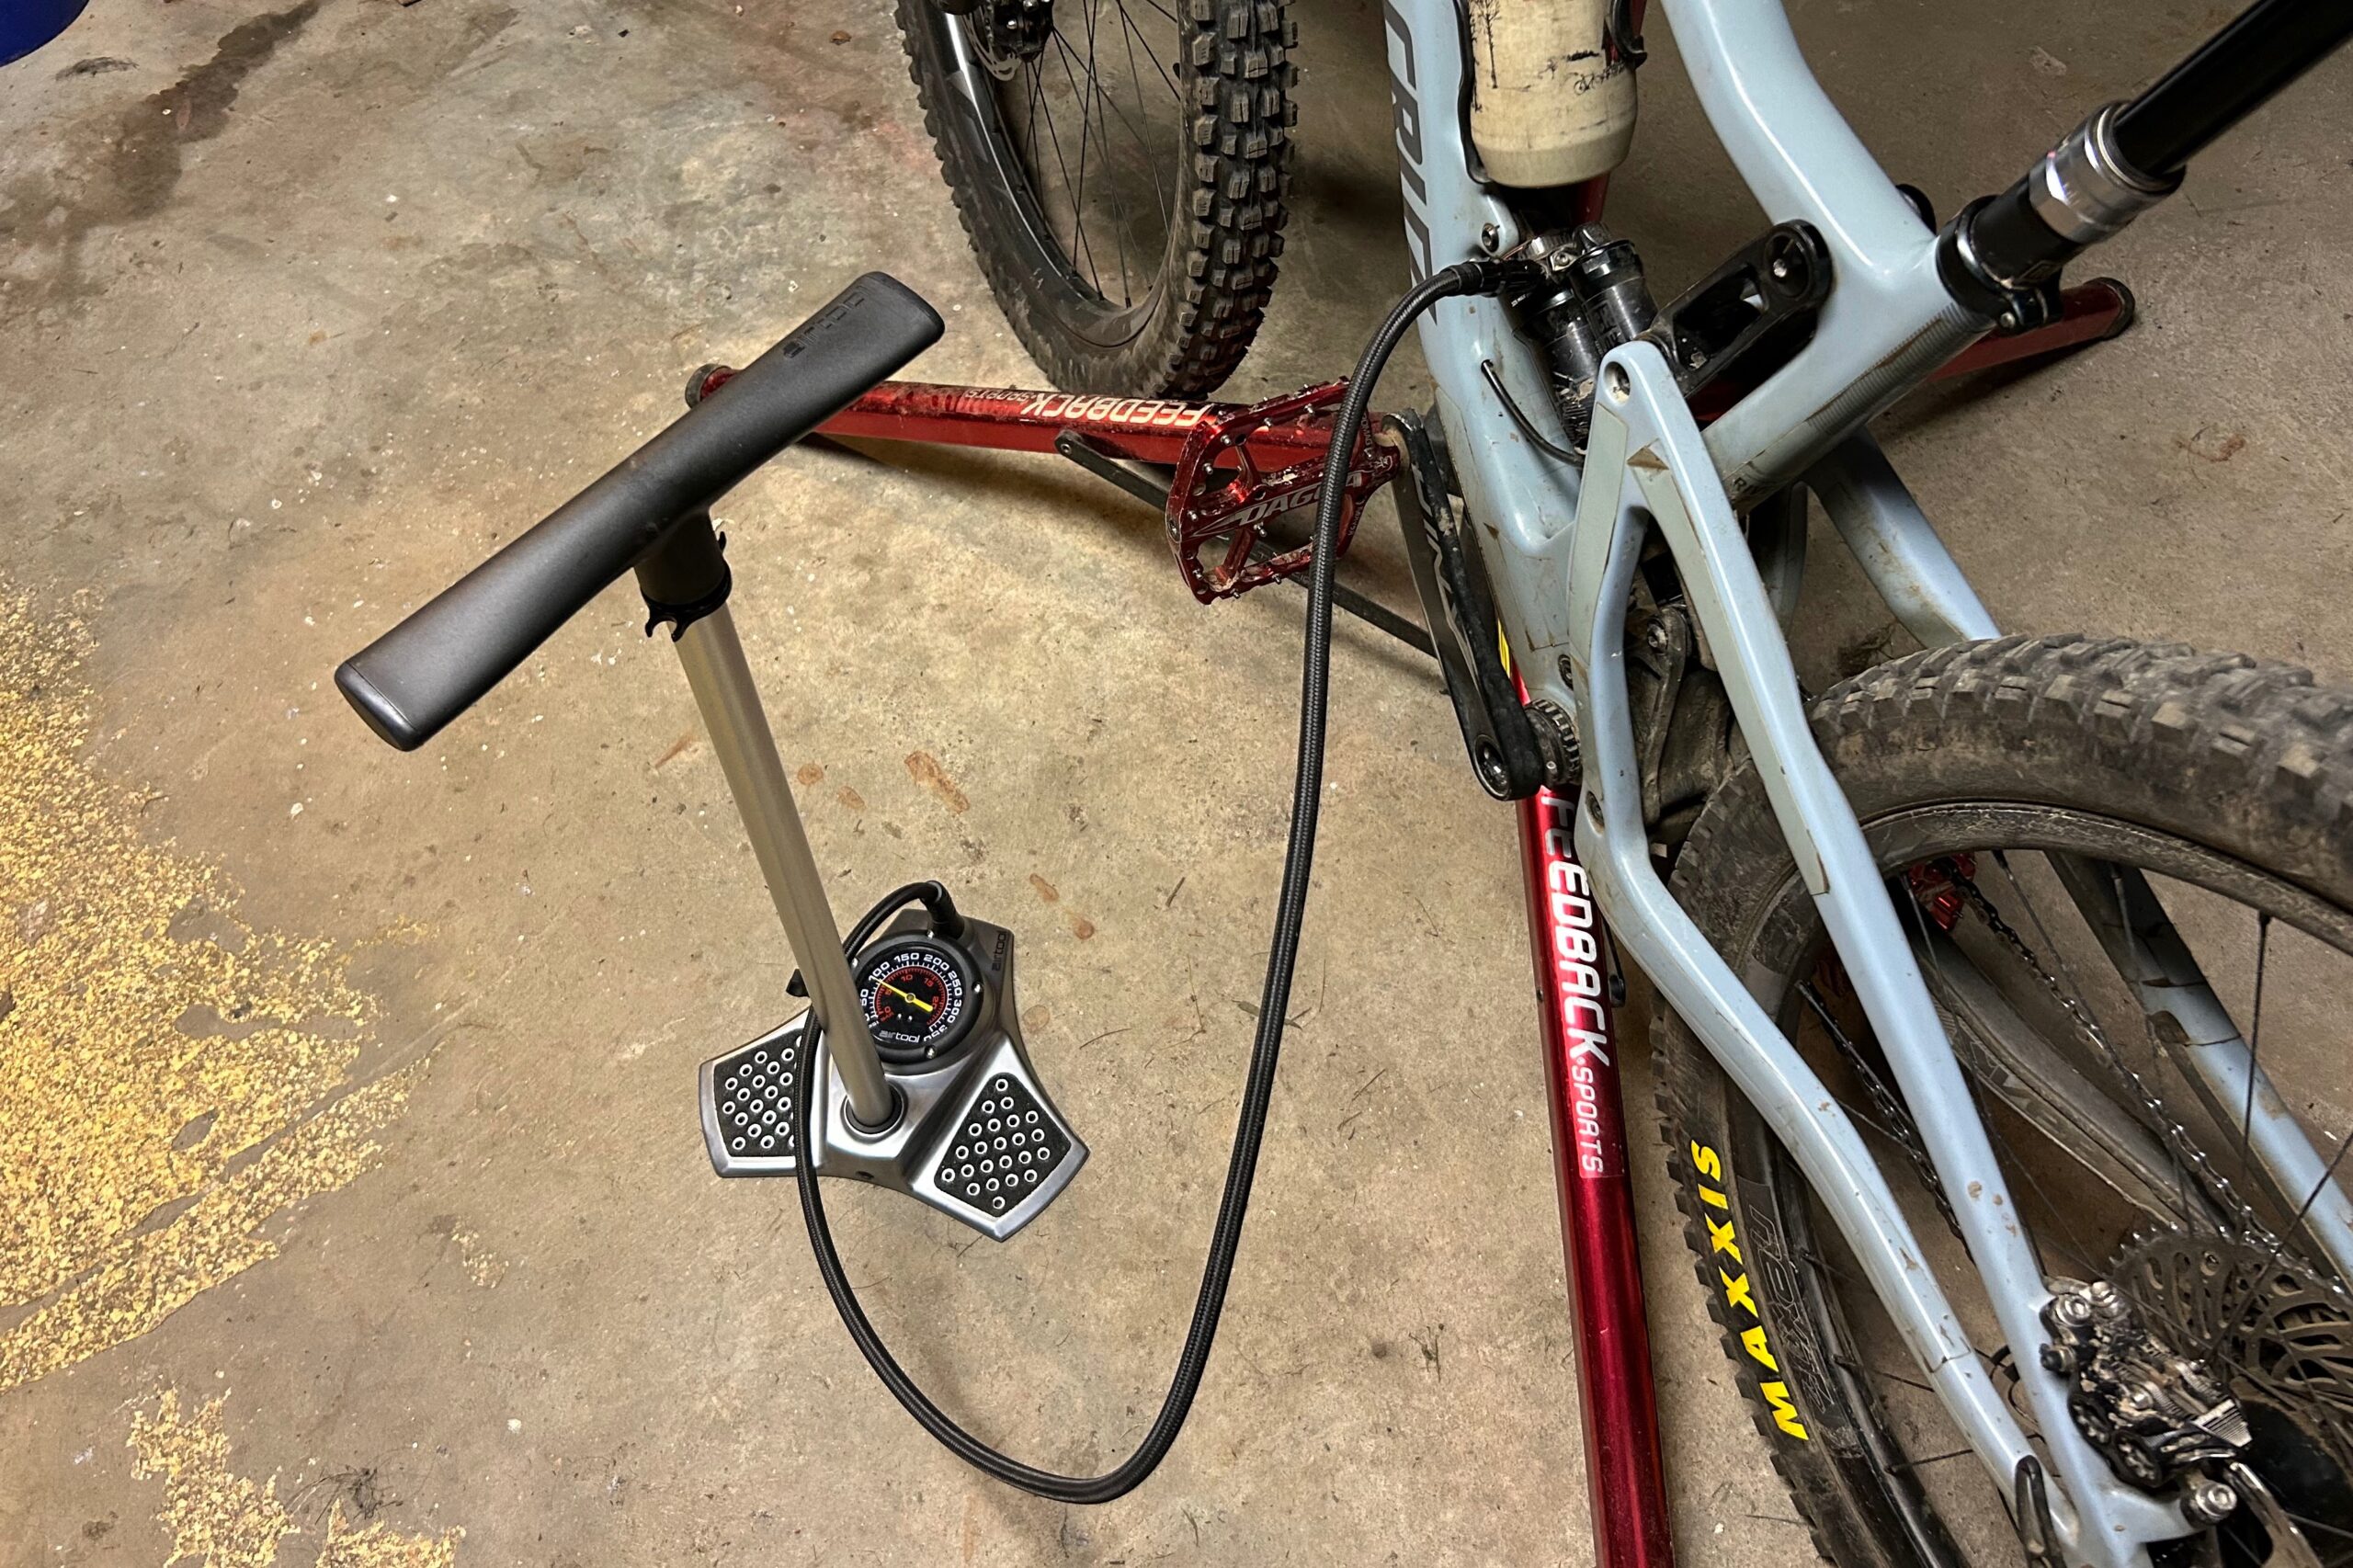 Specialized Air Tool UHP bike pump attached to a rear shock in the home workshop